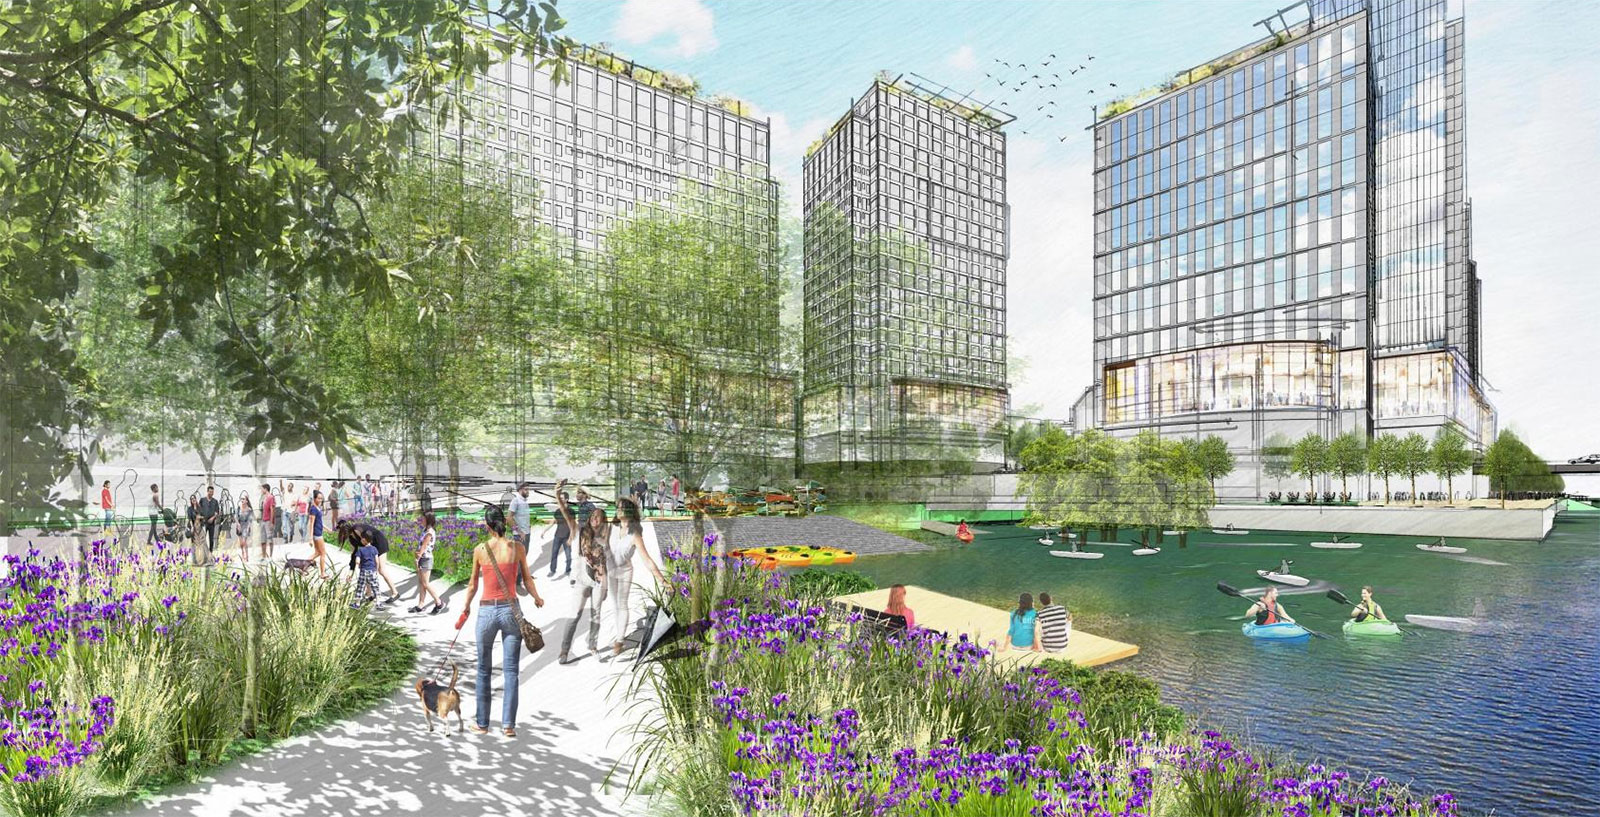 Dynamic Star Appoints Meridian Capital Group to Obtain Equity and Debt for .5 Billion Historic Development Along Harlem River in the Bronx, NY